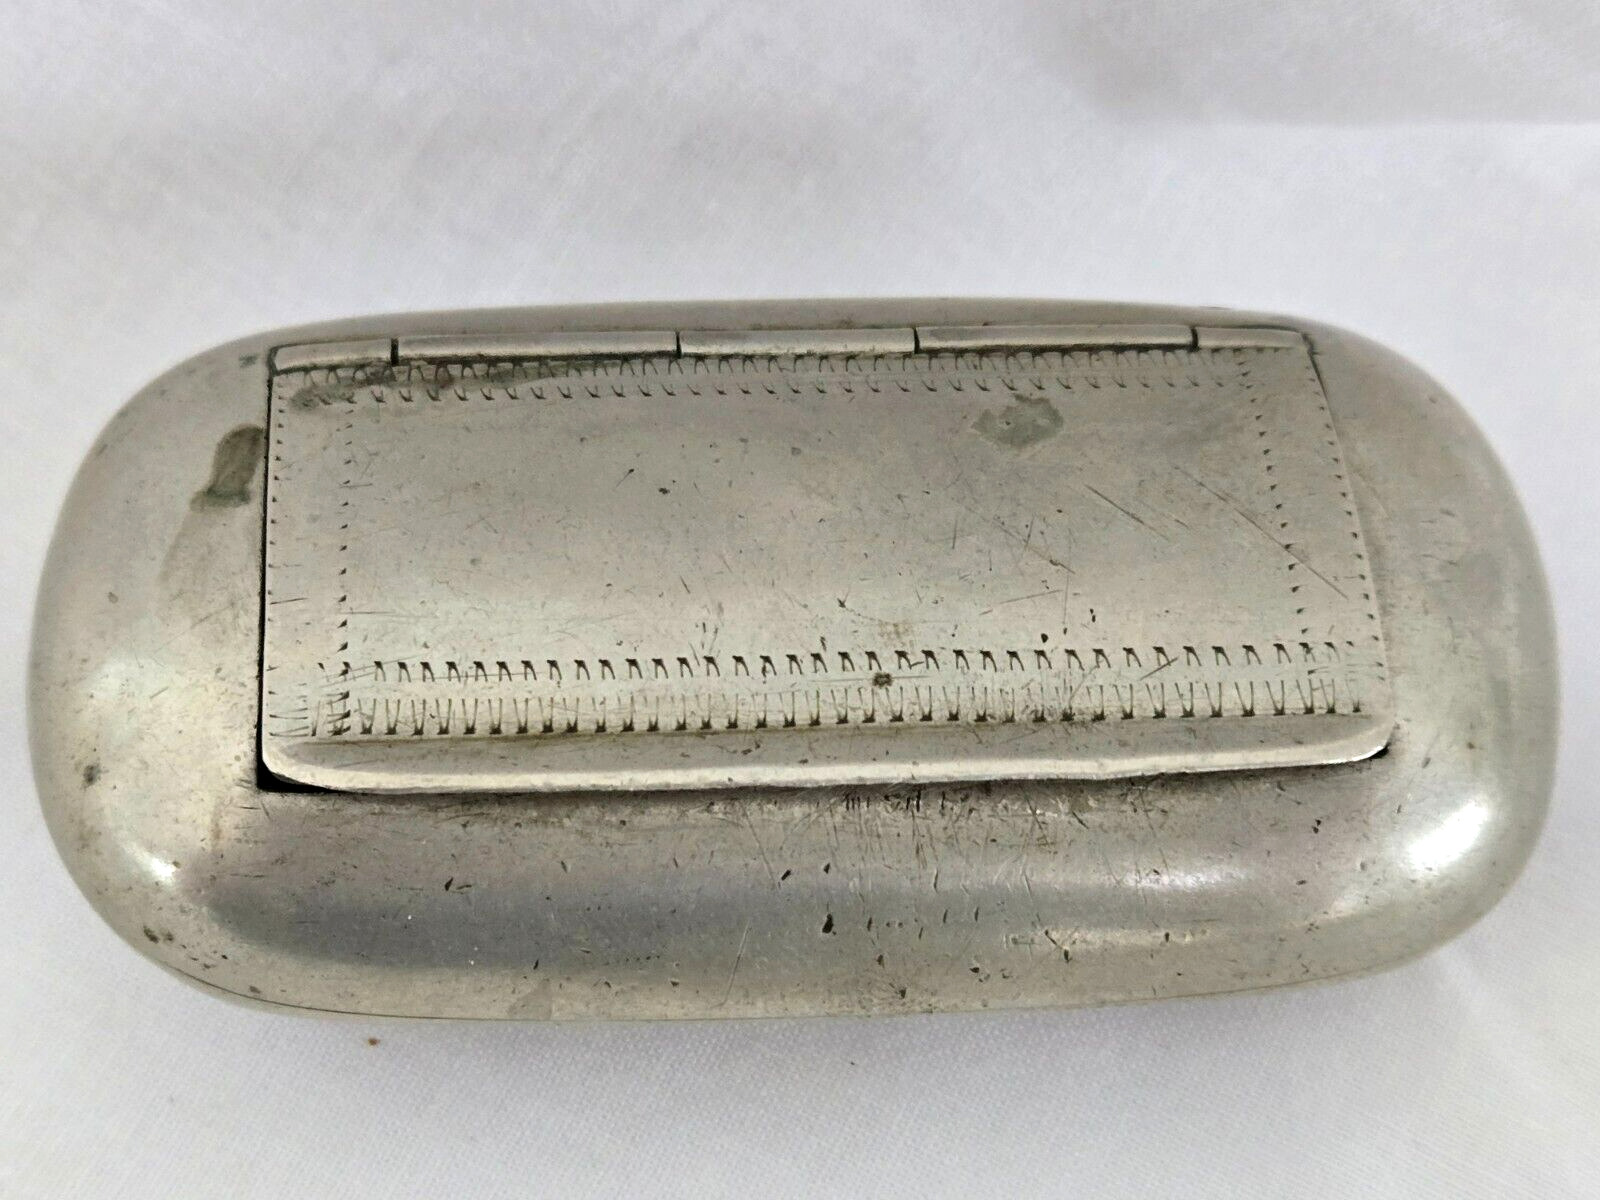 ANTIQUE,19th CENTURY,SNUFF BOX,TOBACCO BOX,NICKEL,SILVER,?,VERY EARLY EXAMPLE